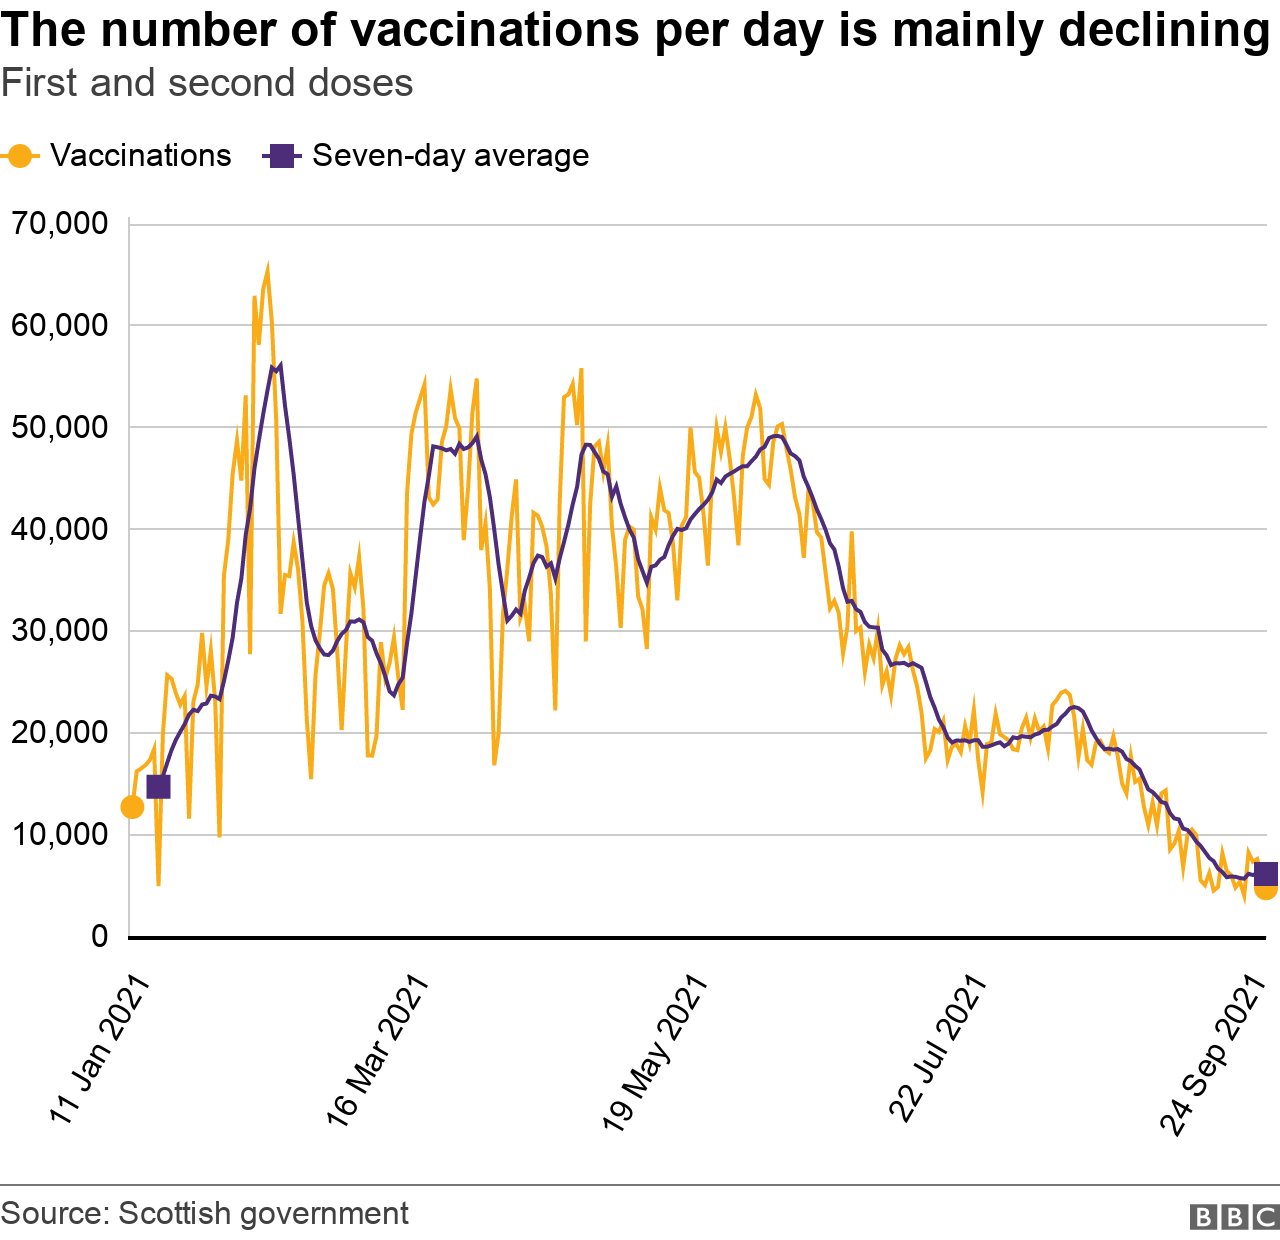 Vaccinations per day